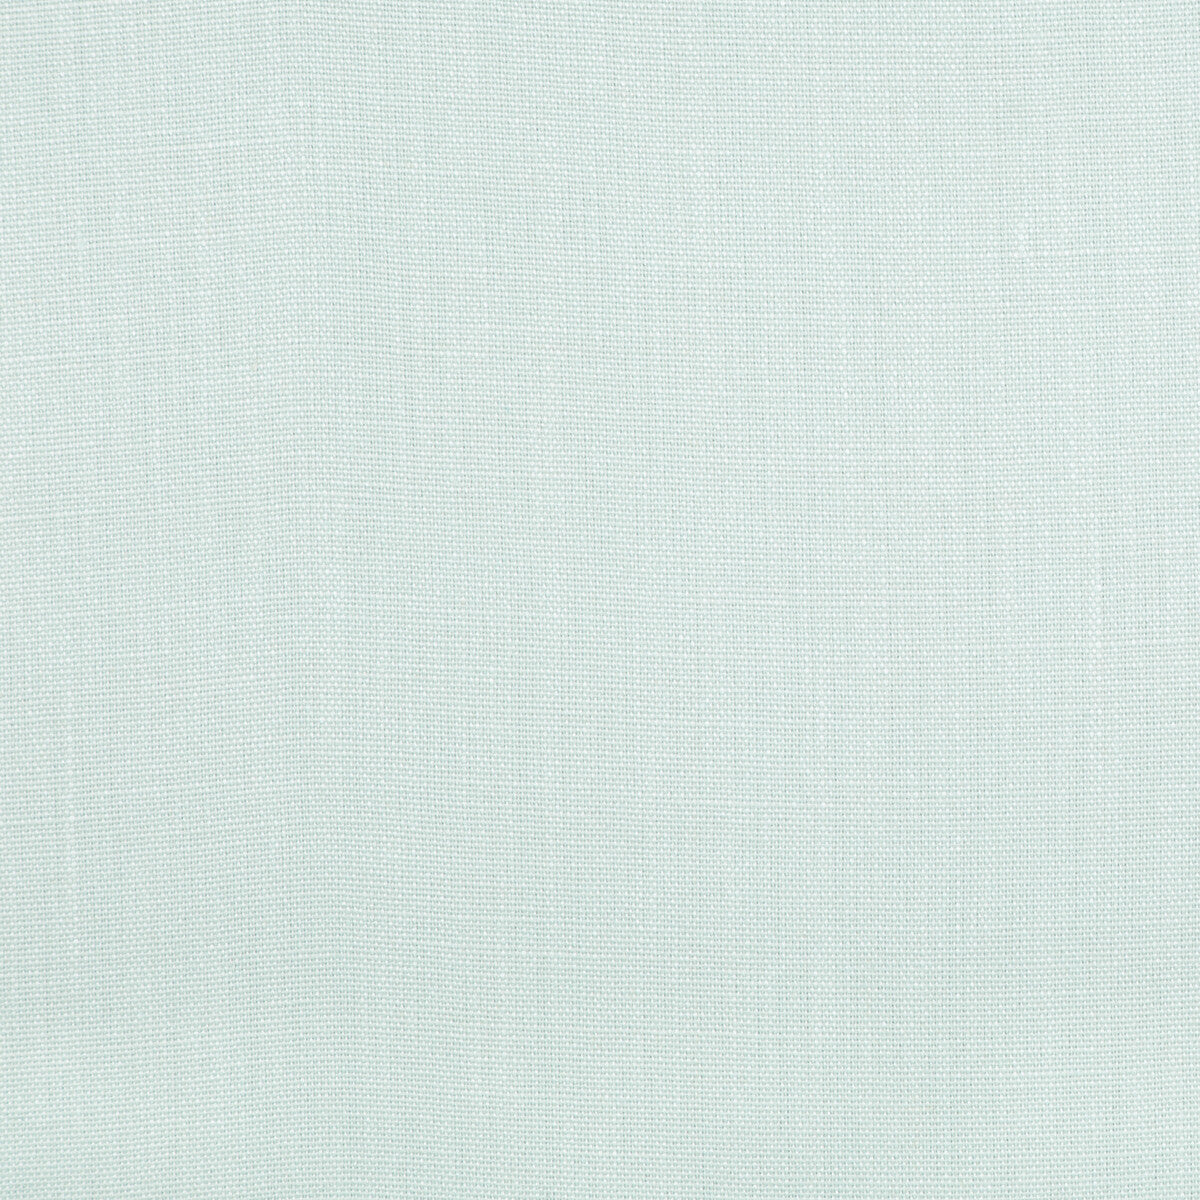 Stone Harbor fabric in spa color - pattern 27591.1500.0 - by Kravet Basics